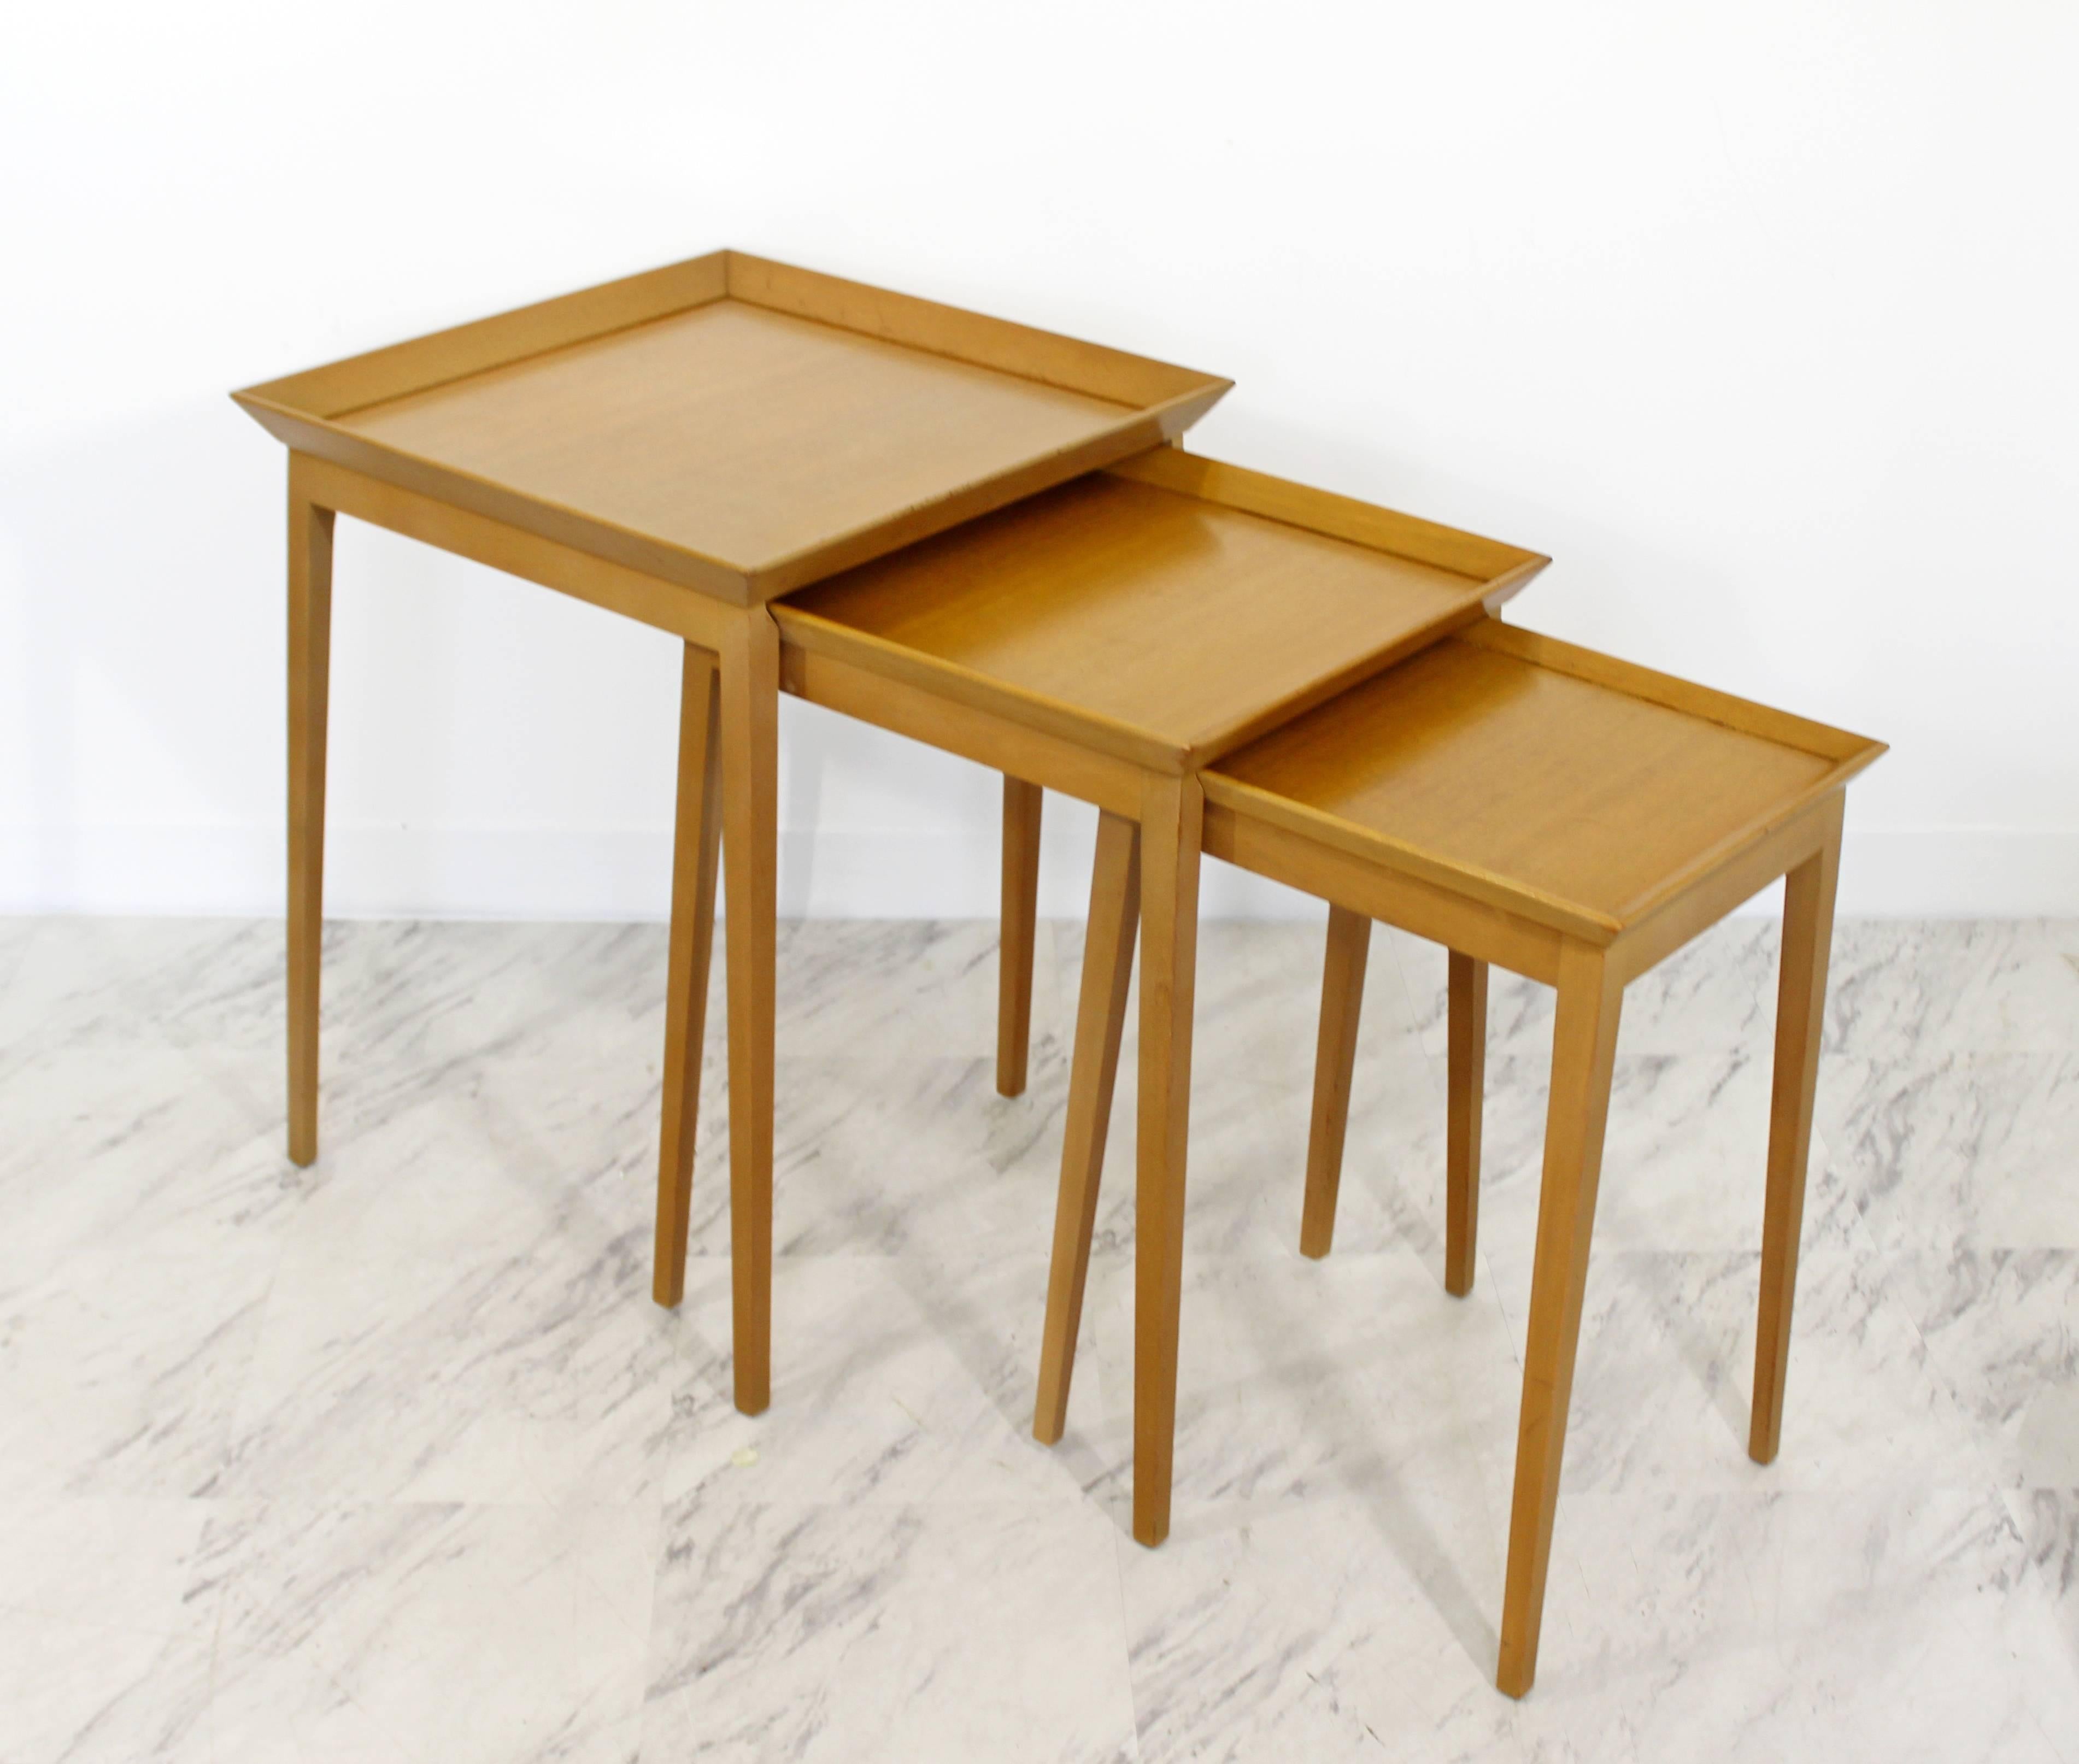 For your consideration is a gorgeous set of nesting table, including three side tables that fit into one another, by T.H. Robsjohn-Gibbings for Widdicomb, circa the 1950s. In excellent condition. The largest table measures 19.75